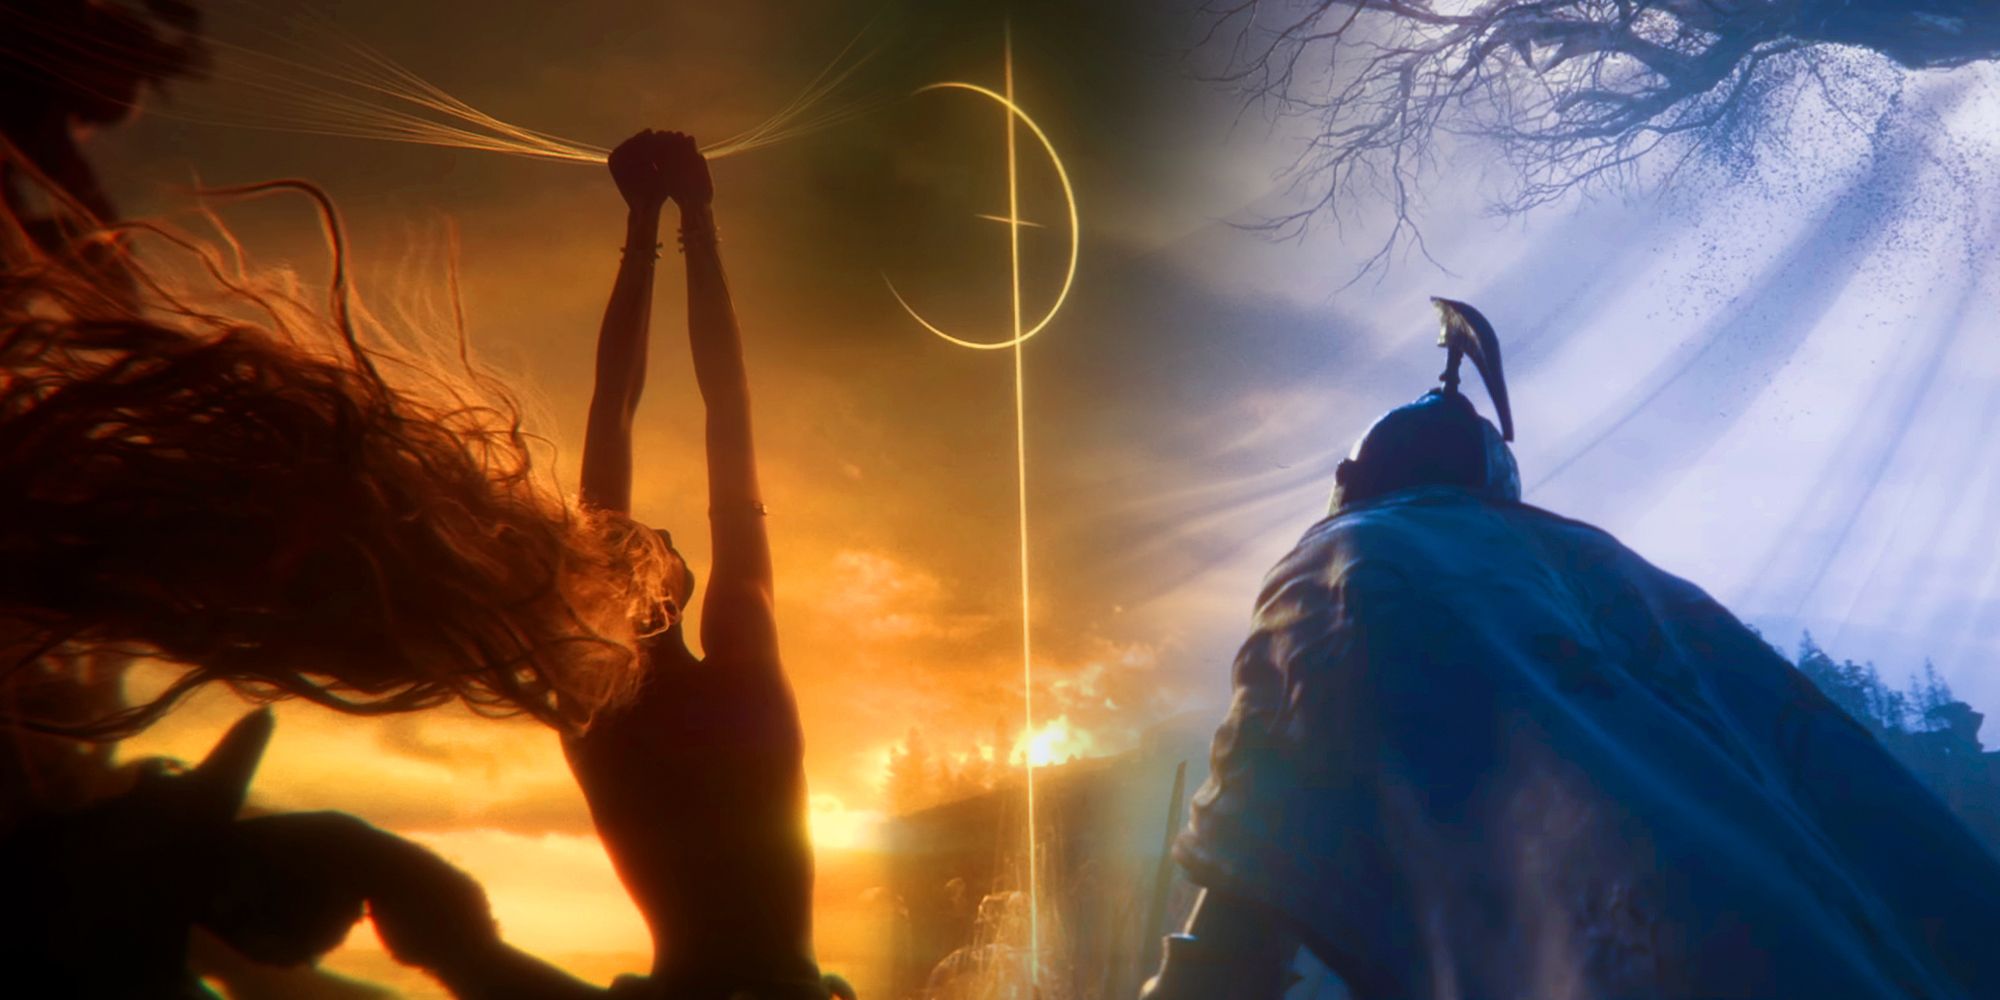 On the left is a figure, presumably Marika, holding golden strands of light above their head. On the right is an armored knight, kneeling before a golden rune.